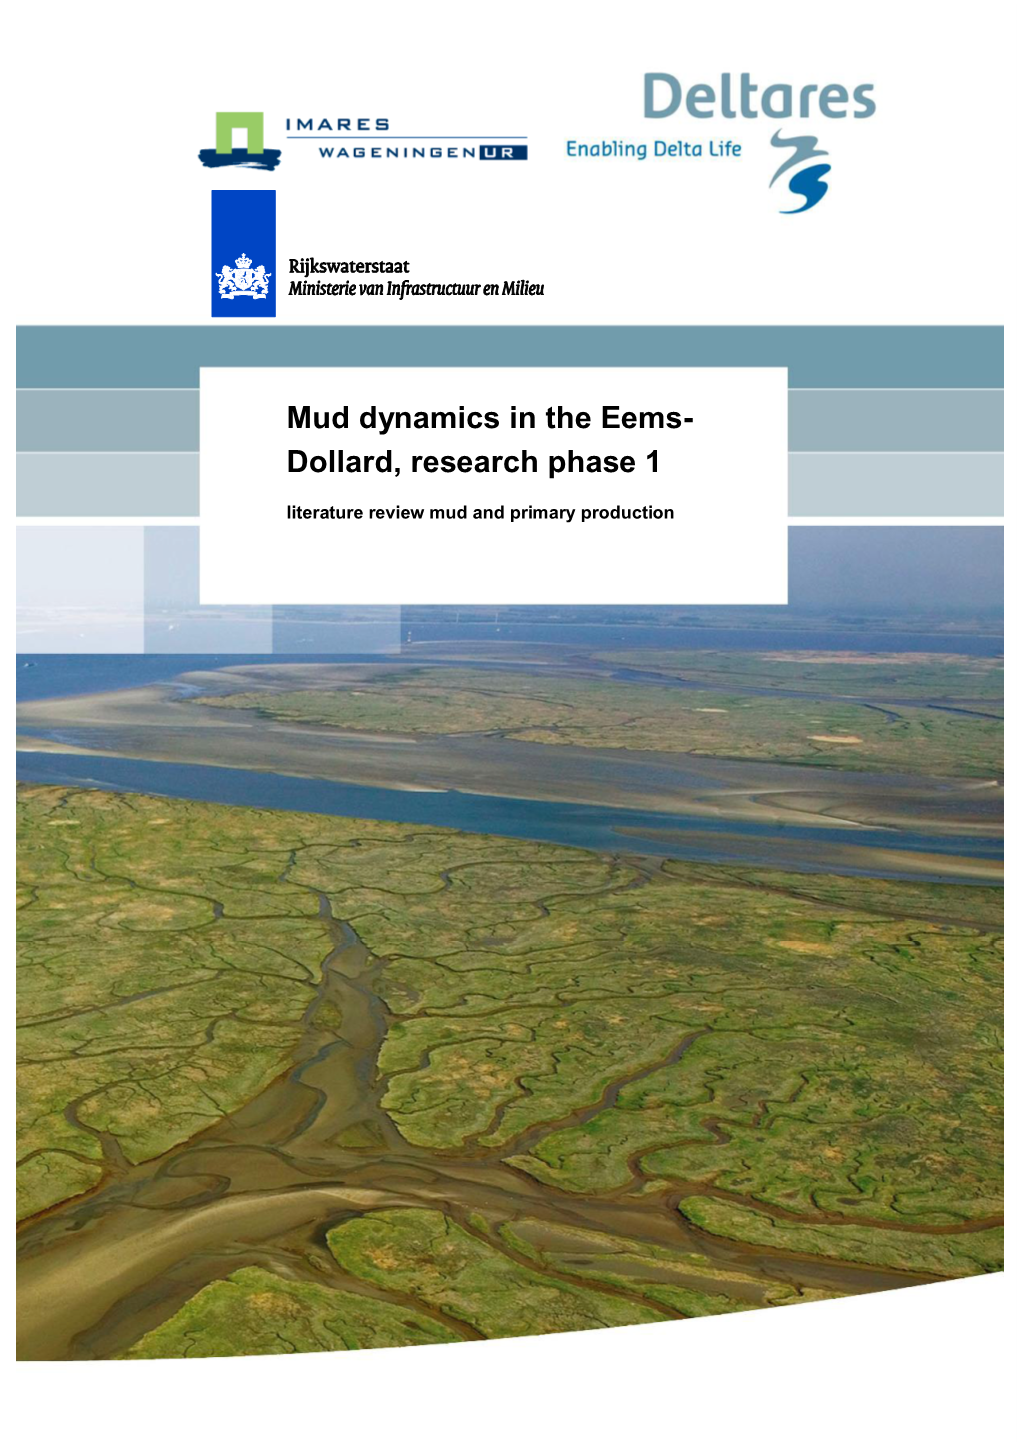 Mud Dynamics in the Eems- Dollard, Research Phase 1 Literature Review Mud and Primary Production